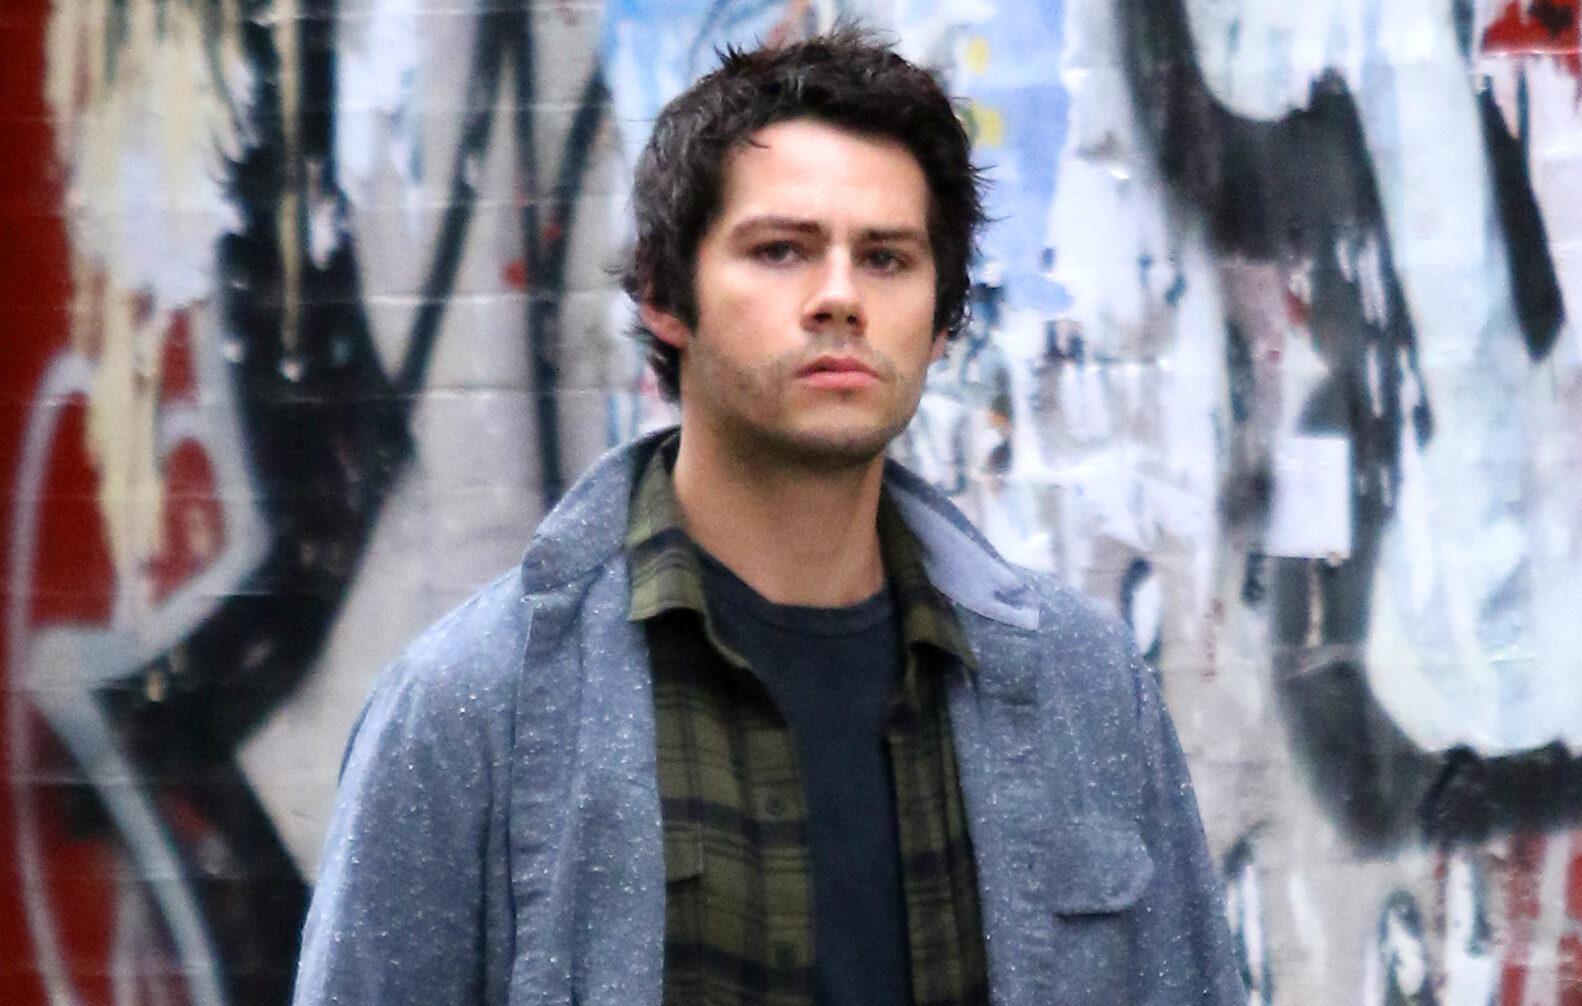 Teen Wolf star Dylan O'brien goes out for a walk in New York City